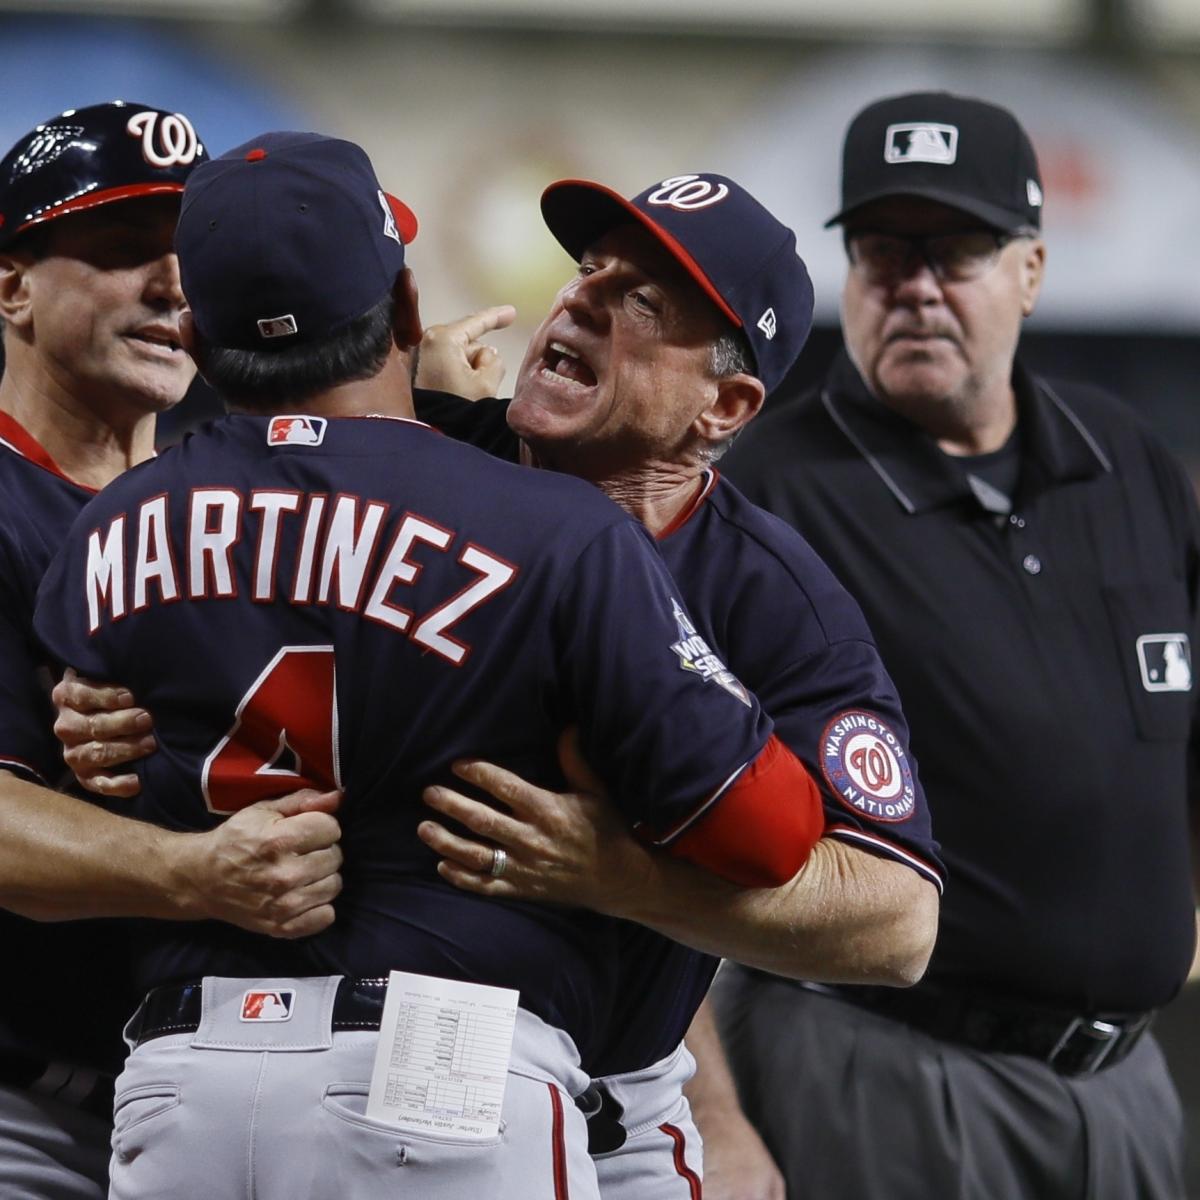 MLB umpires get defensive about how they interpret controversial